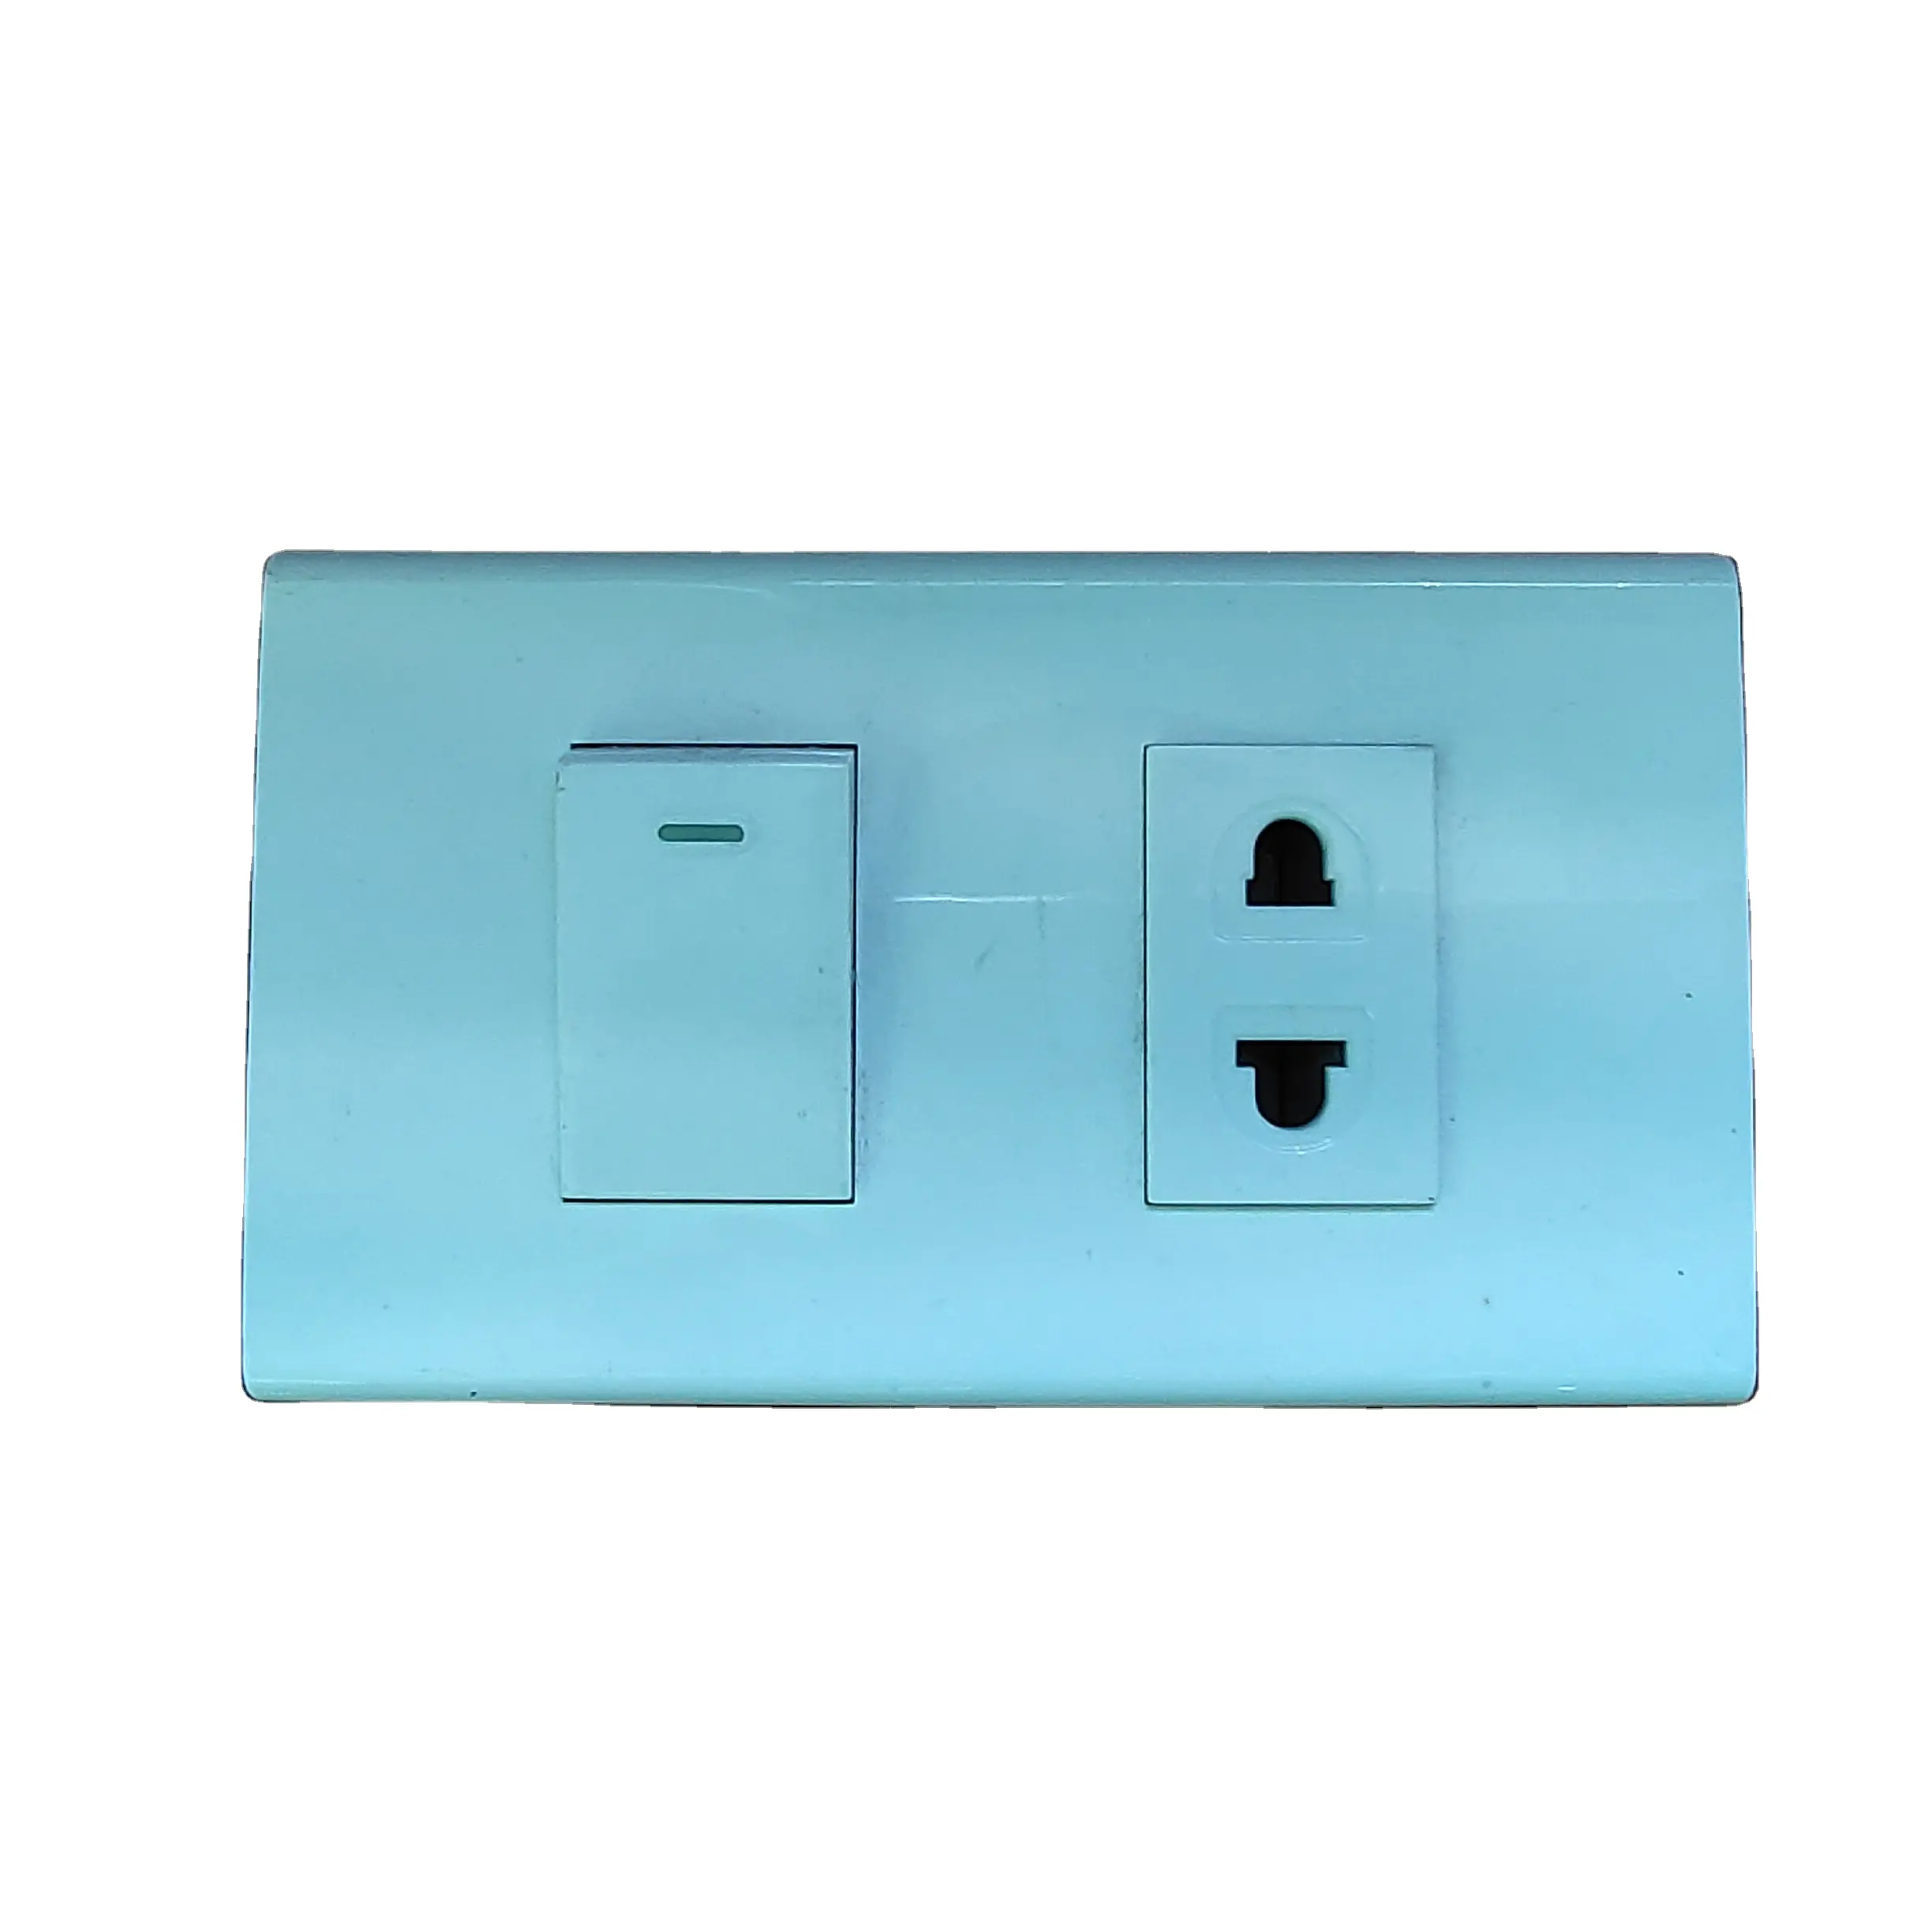 120 USA model switch socket for Thailand,Vietnam,South American